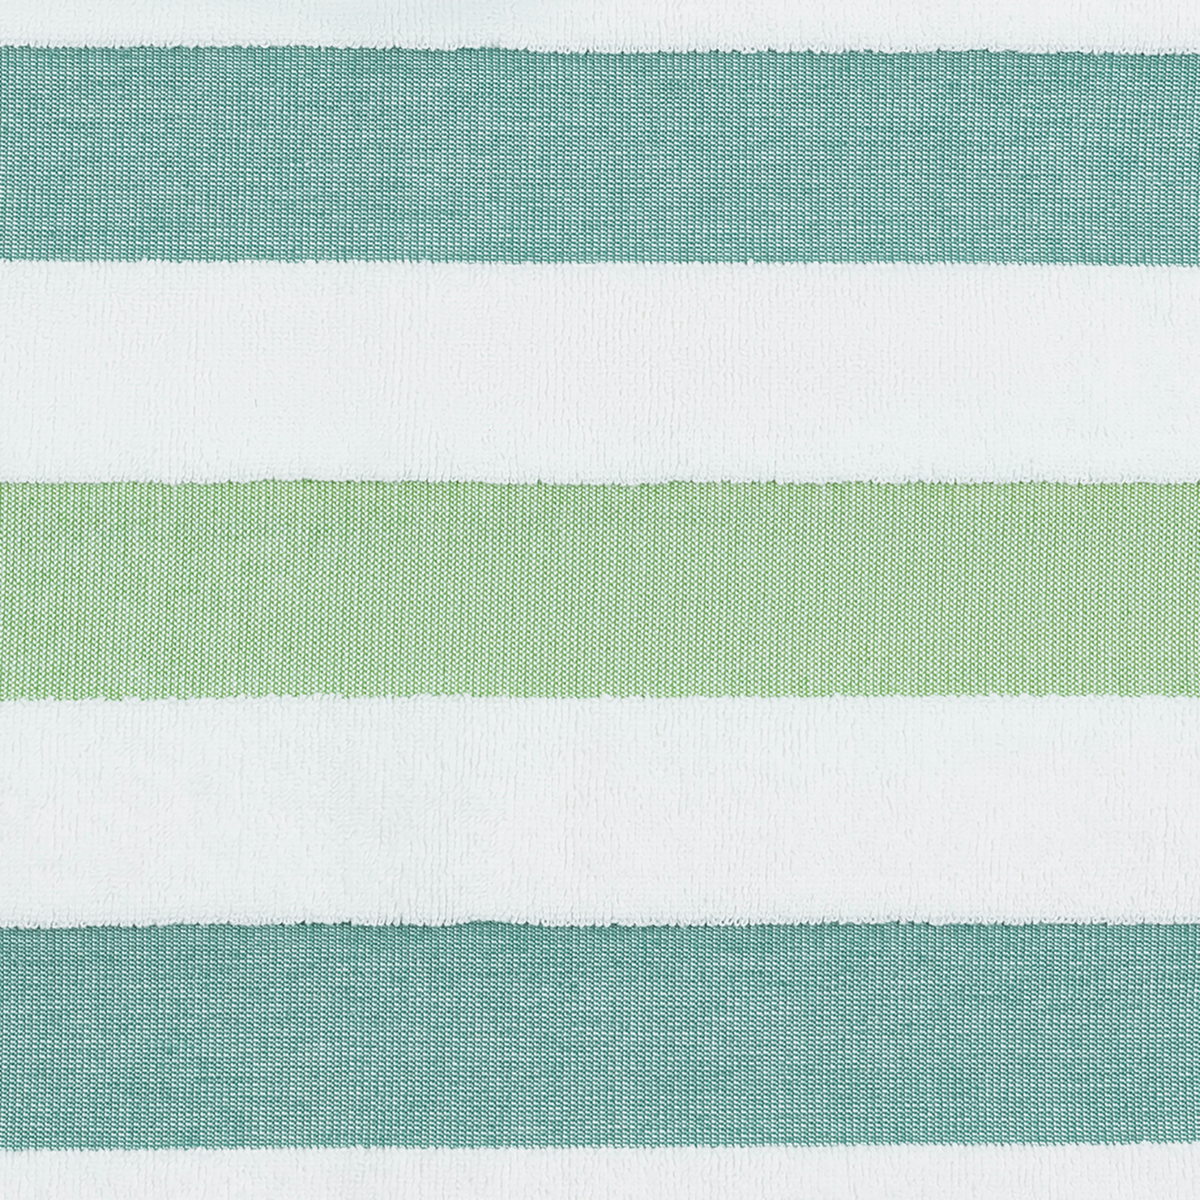 Swatch Sample of Matouk Amado Pool and Beach Towels in Palm Stripe Color